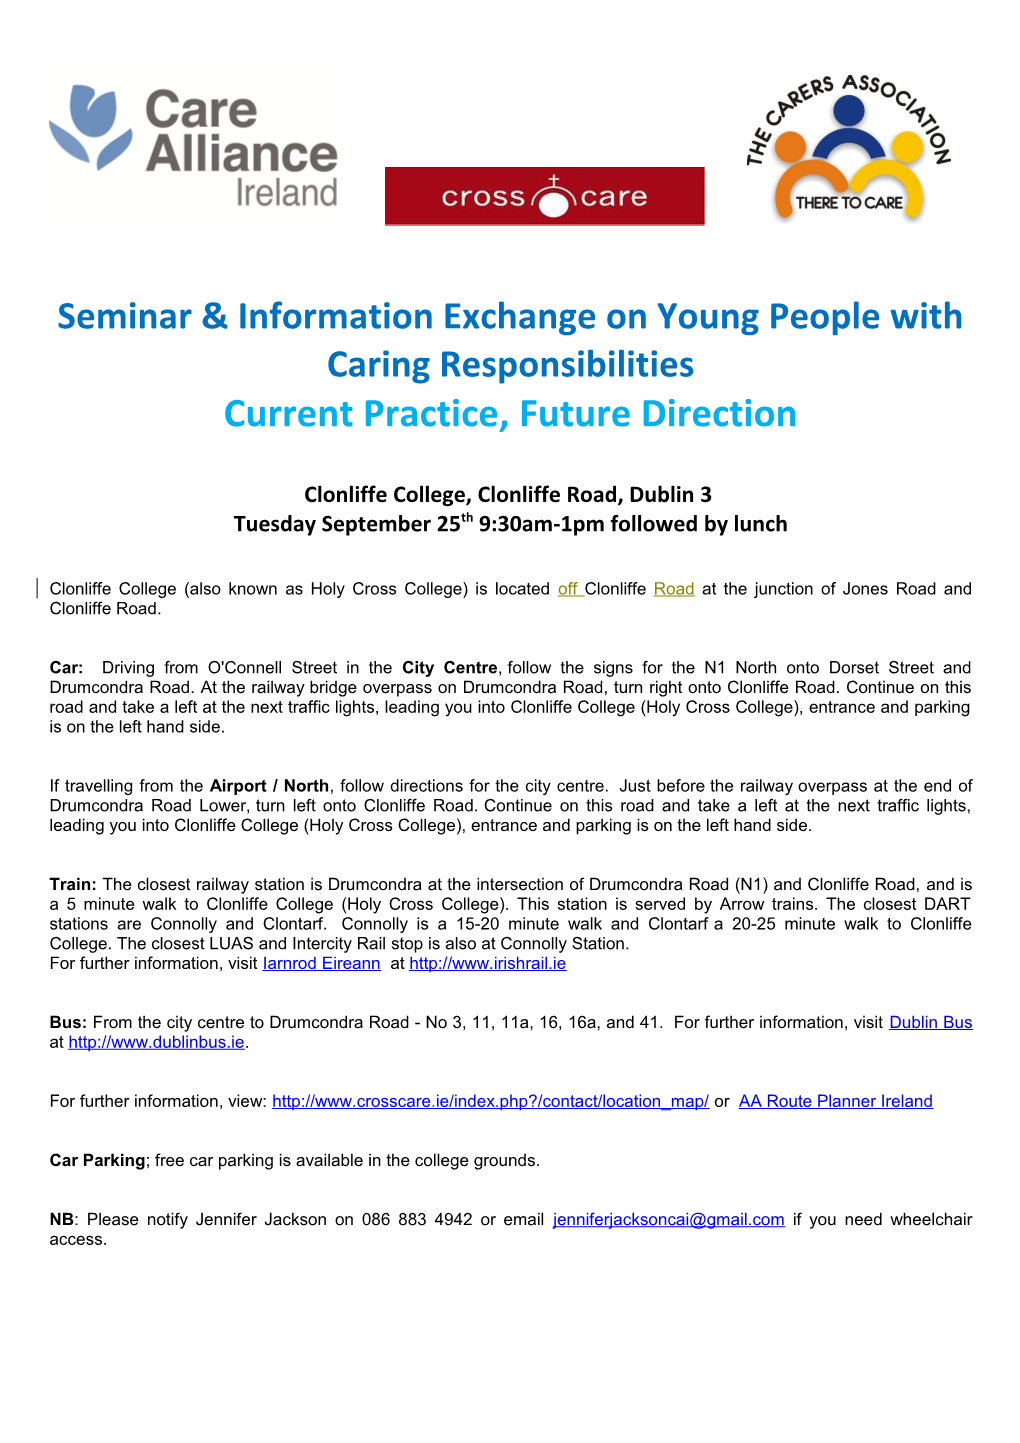 Seminar & Information Exchange on Young People with Caring Responsibilities